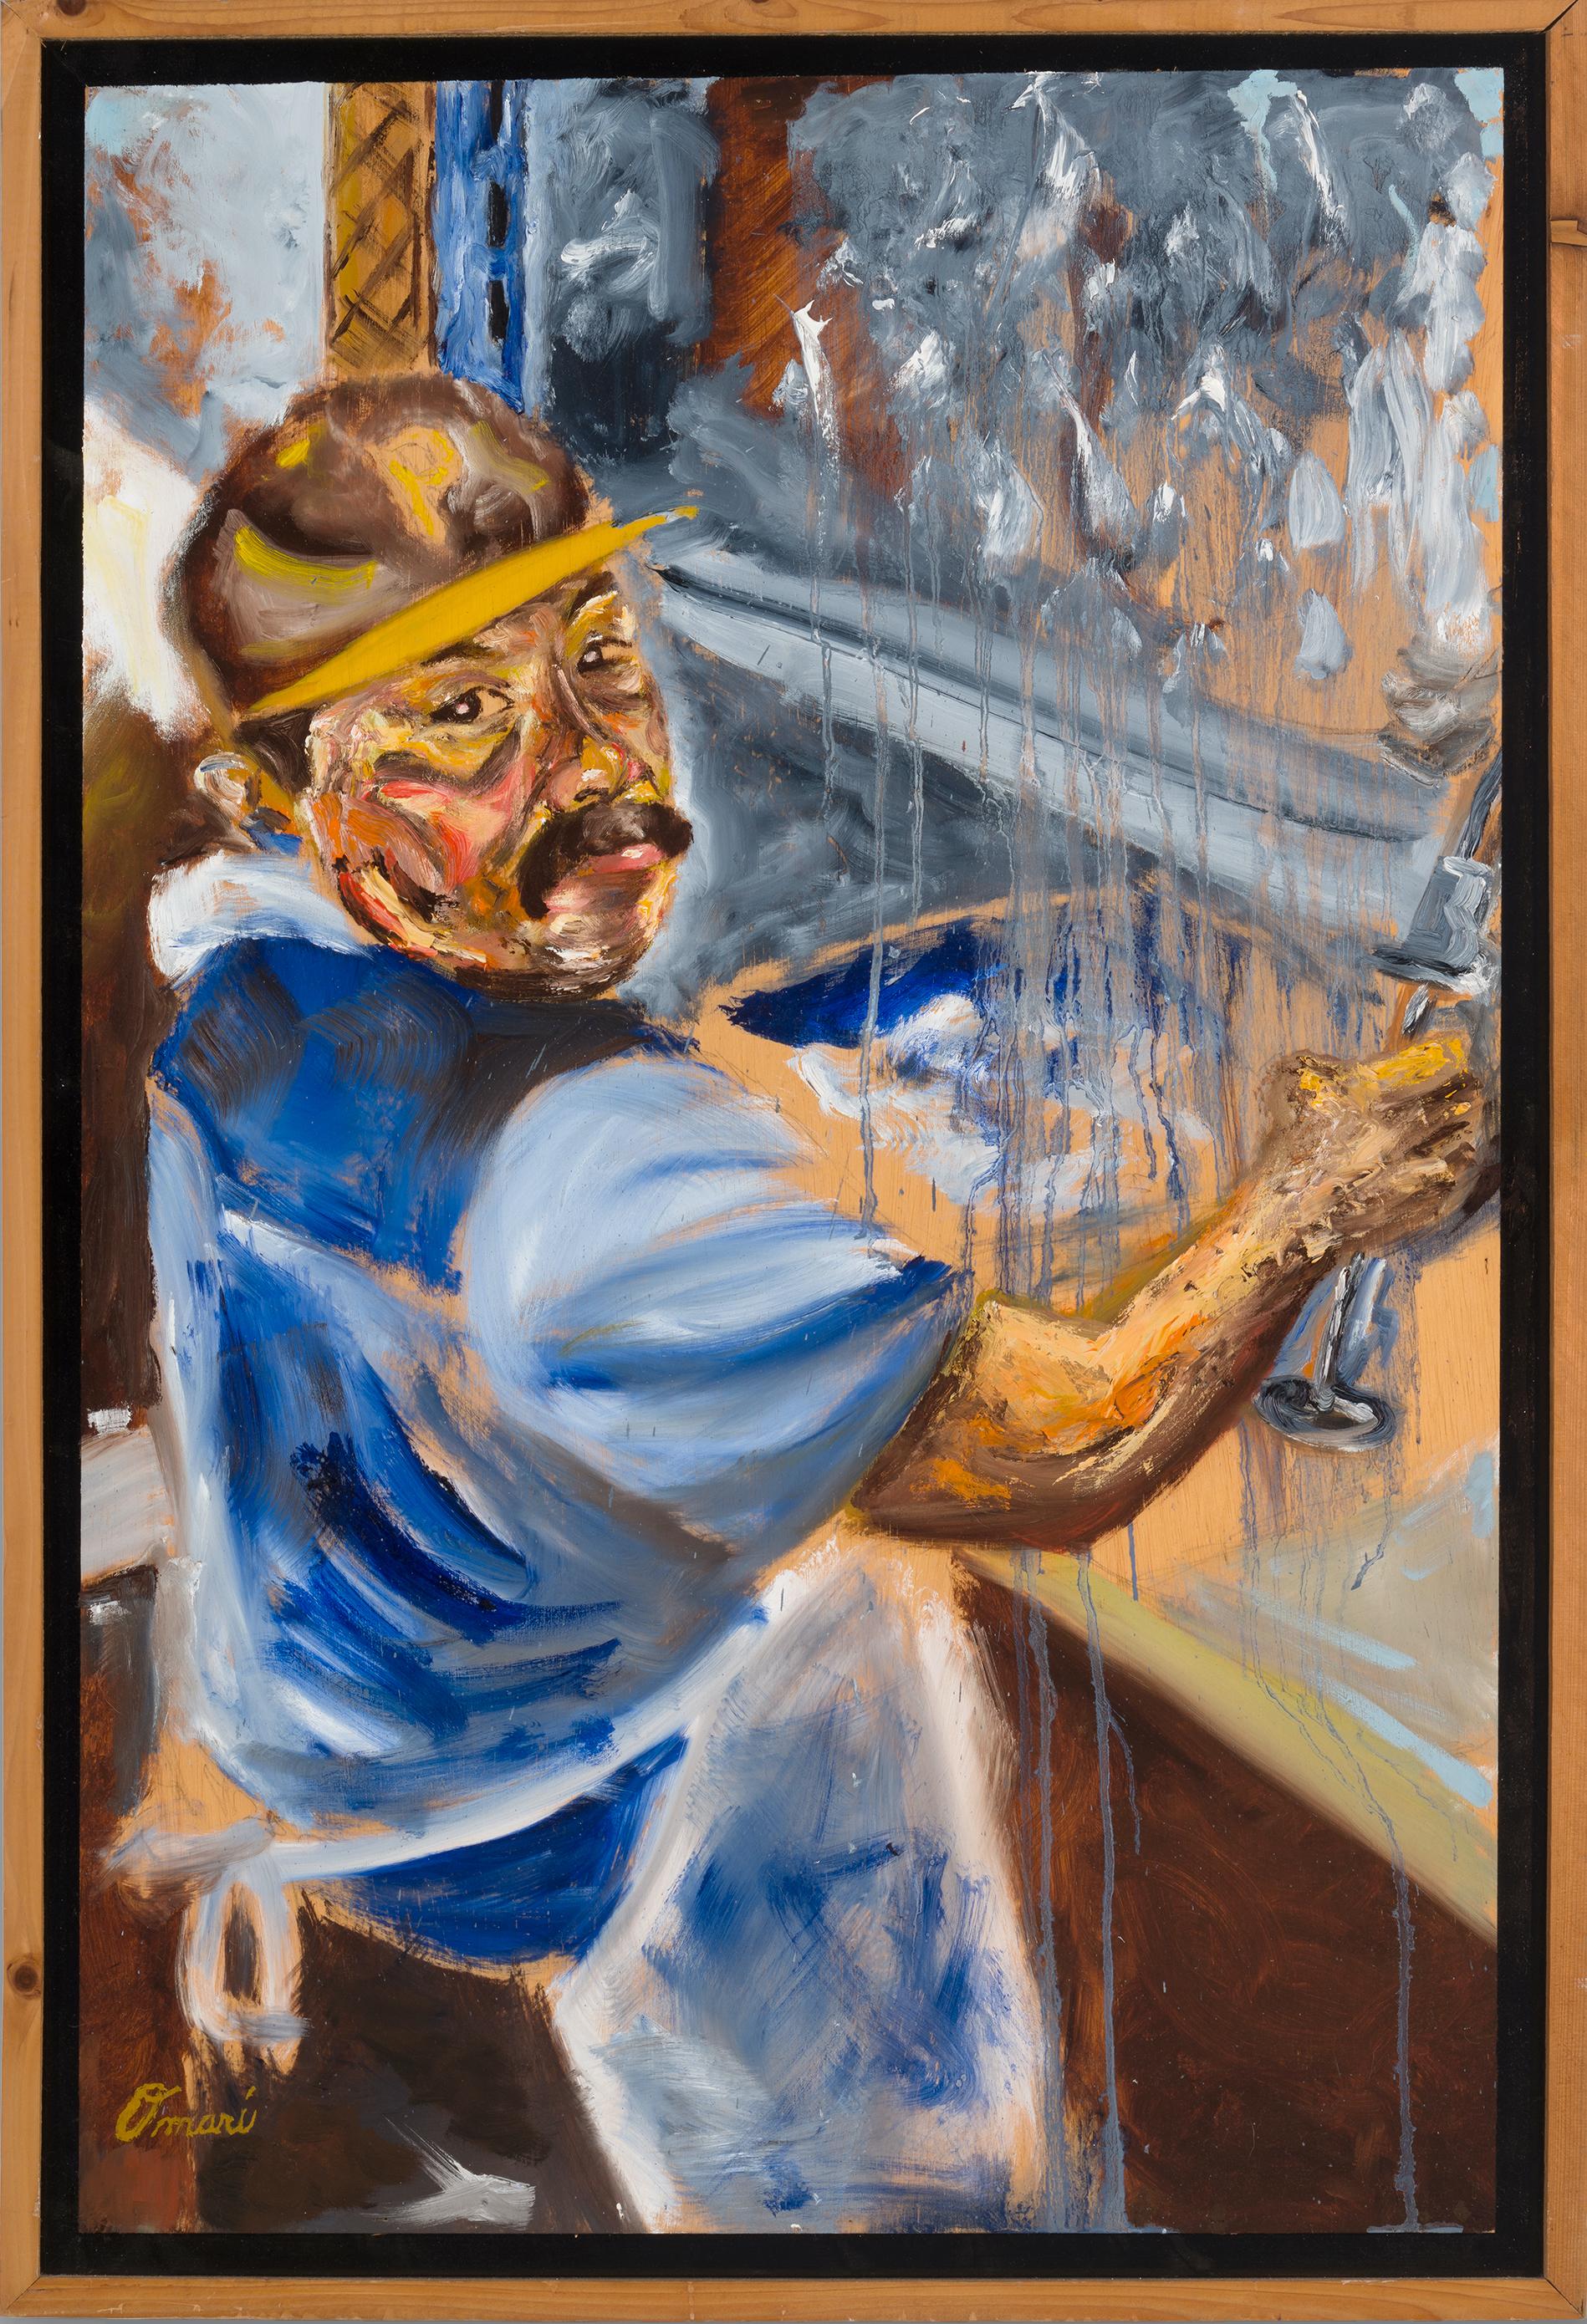 Omari Booker Figurative Painting - ESSENTIAL - Oil Painting of an Essential Worker Dishwasher Named Raymundo